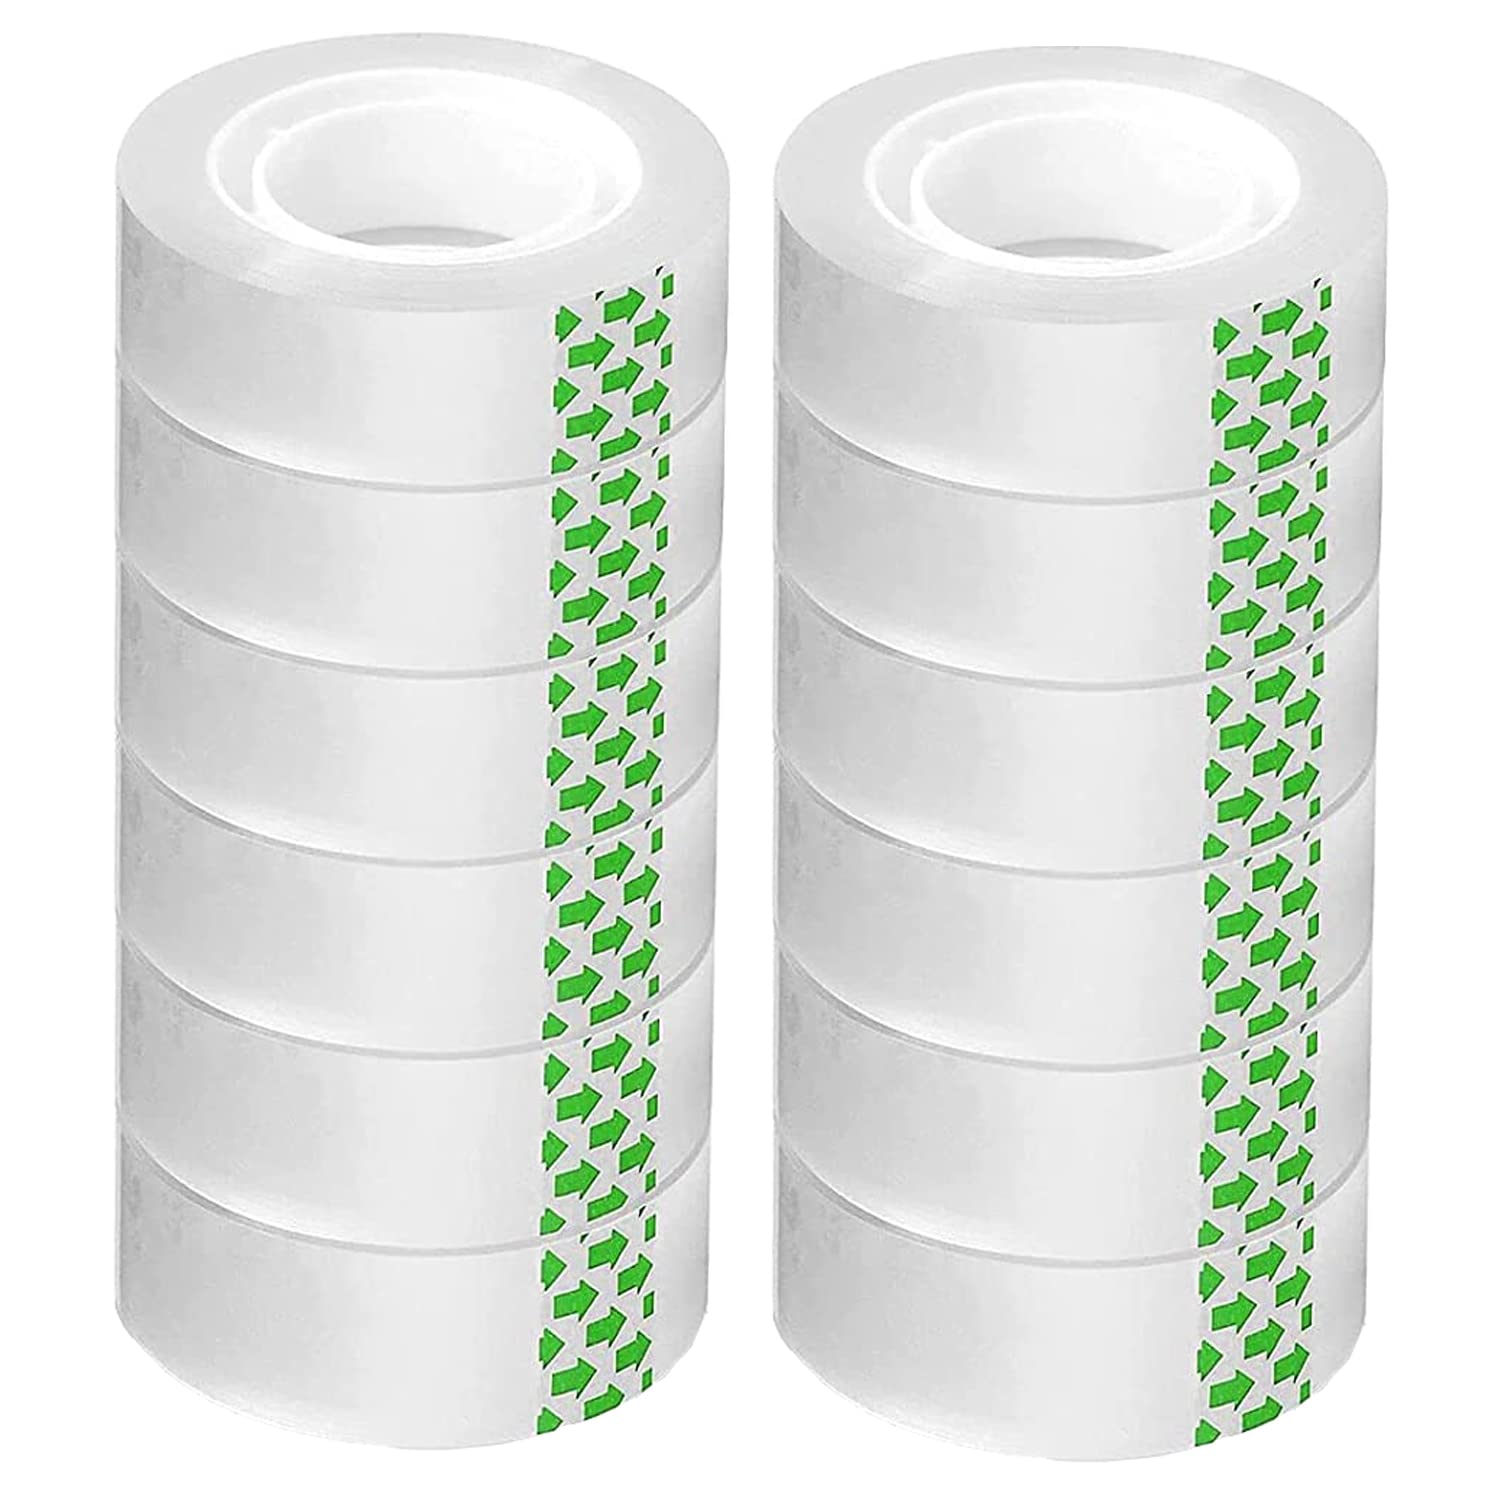 Cayxenful 12 Rolls Transparent Tape Refills 3/4-Inch x 1000 inch Clear Tape  1 inch Core Clear Tape Refill Rolls for Gift Wrapping Home School Office  Supplies